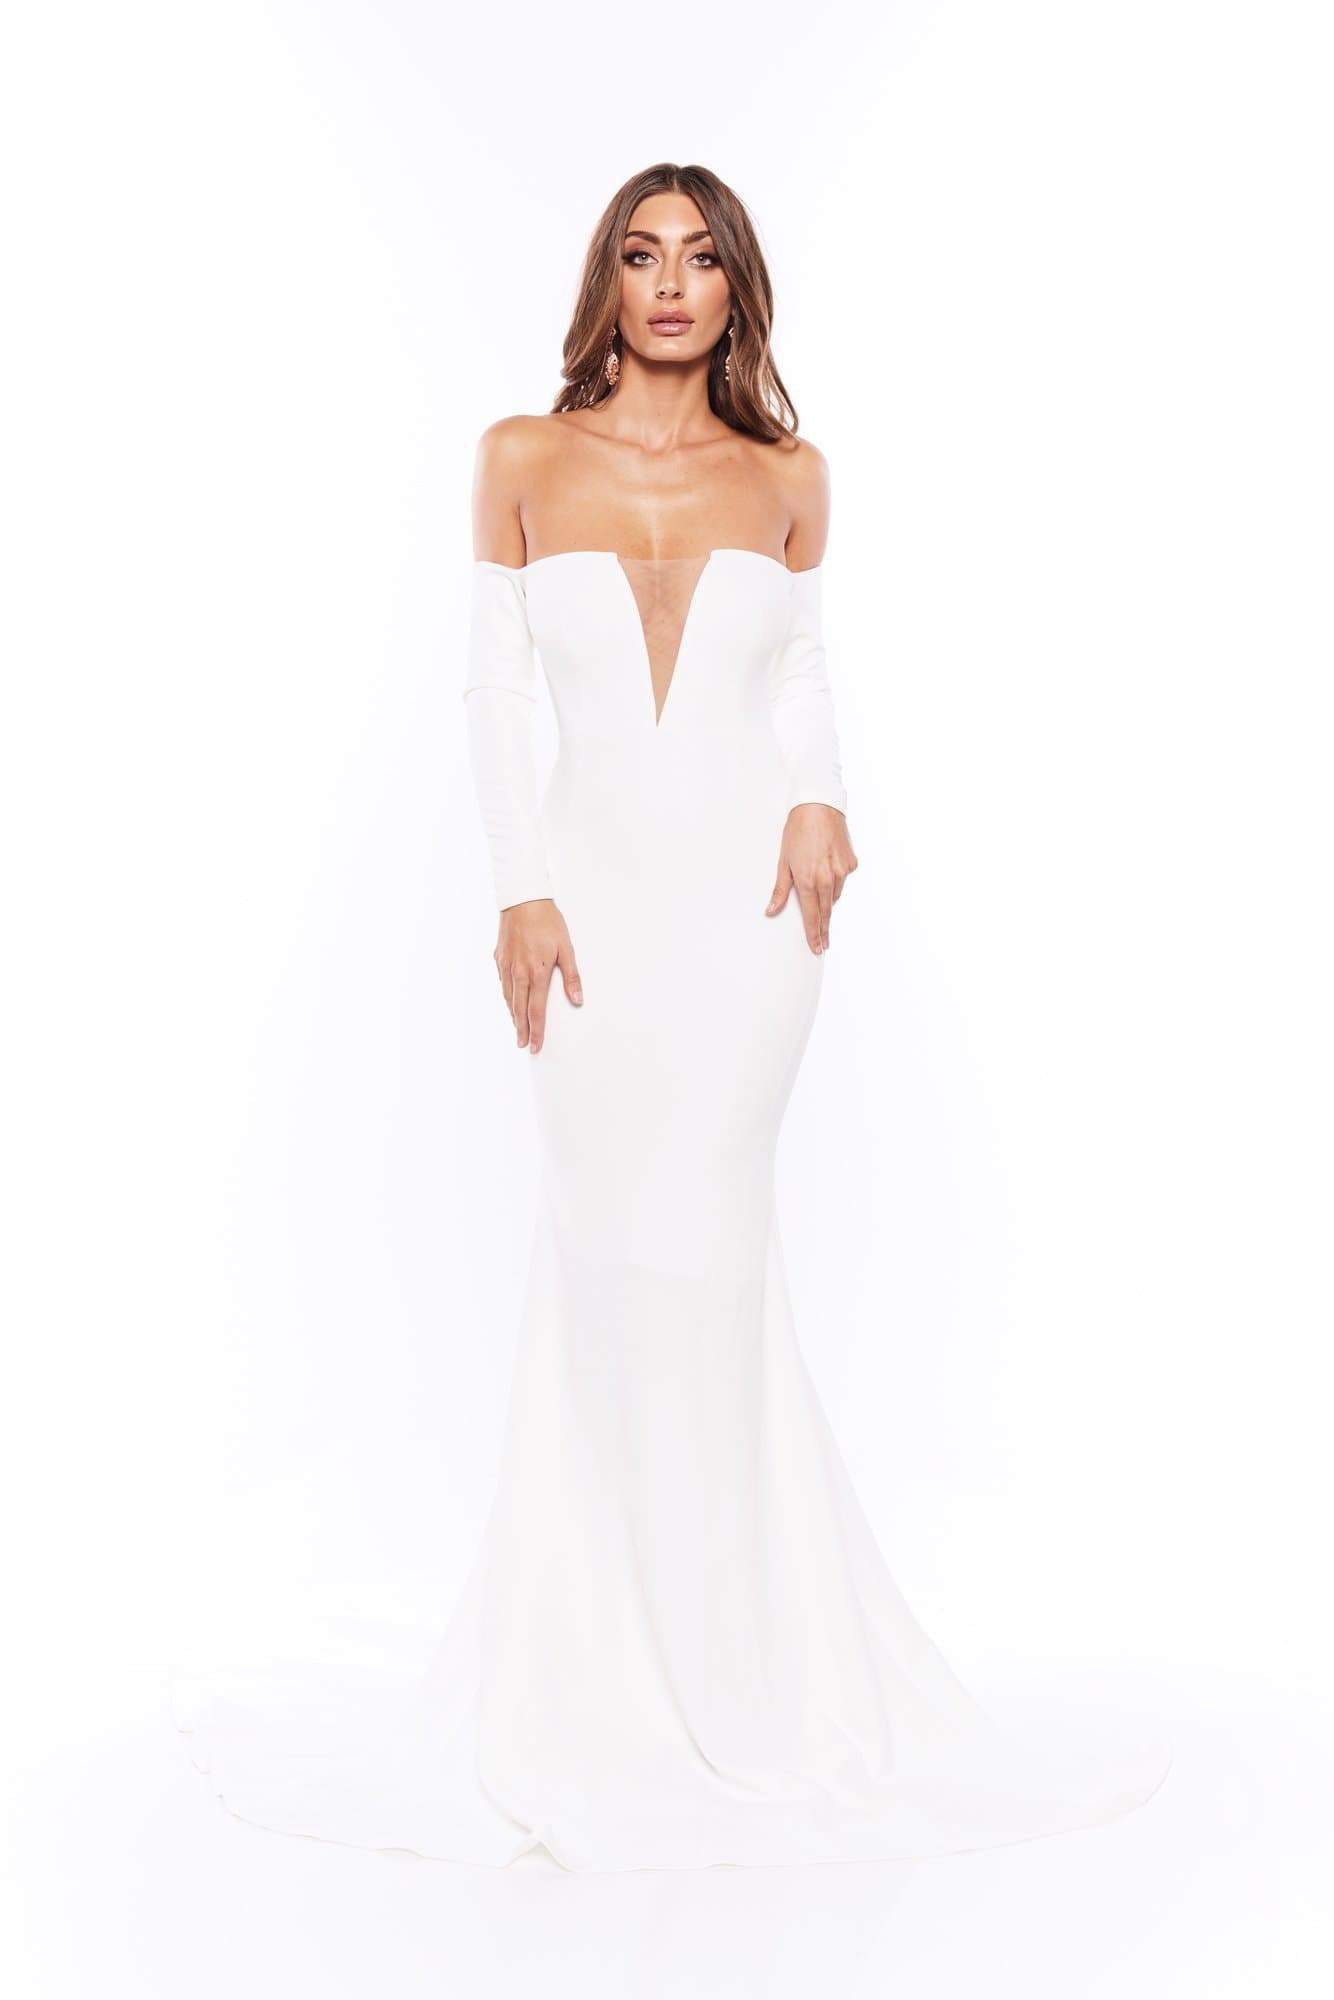 white crepe gown